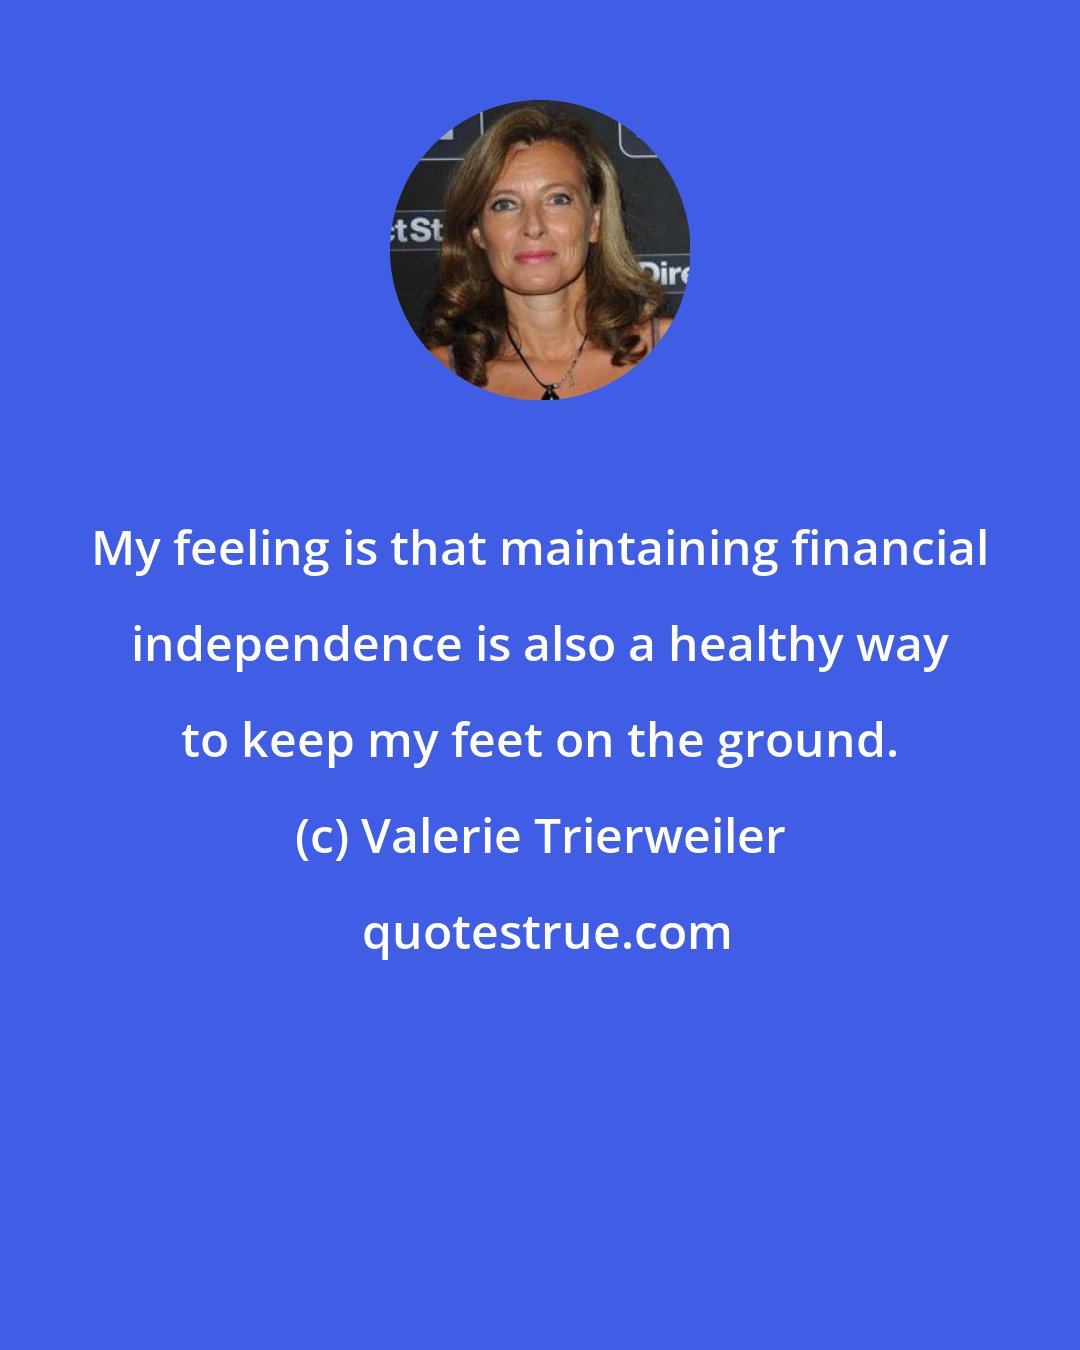 Valerie Trierweiler: My feeling is that maintaining financial independence is also a healthy way to keep my feet on the ground.